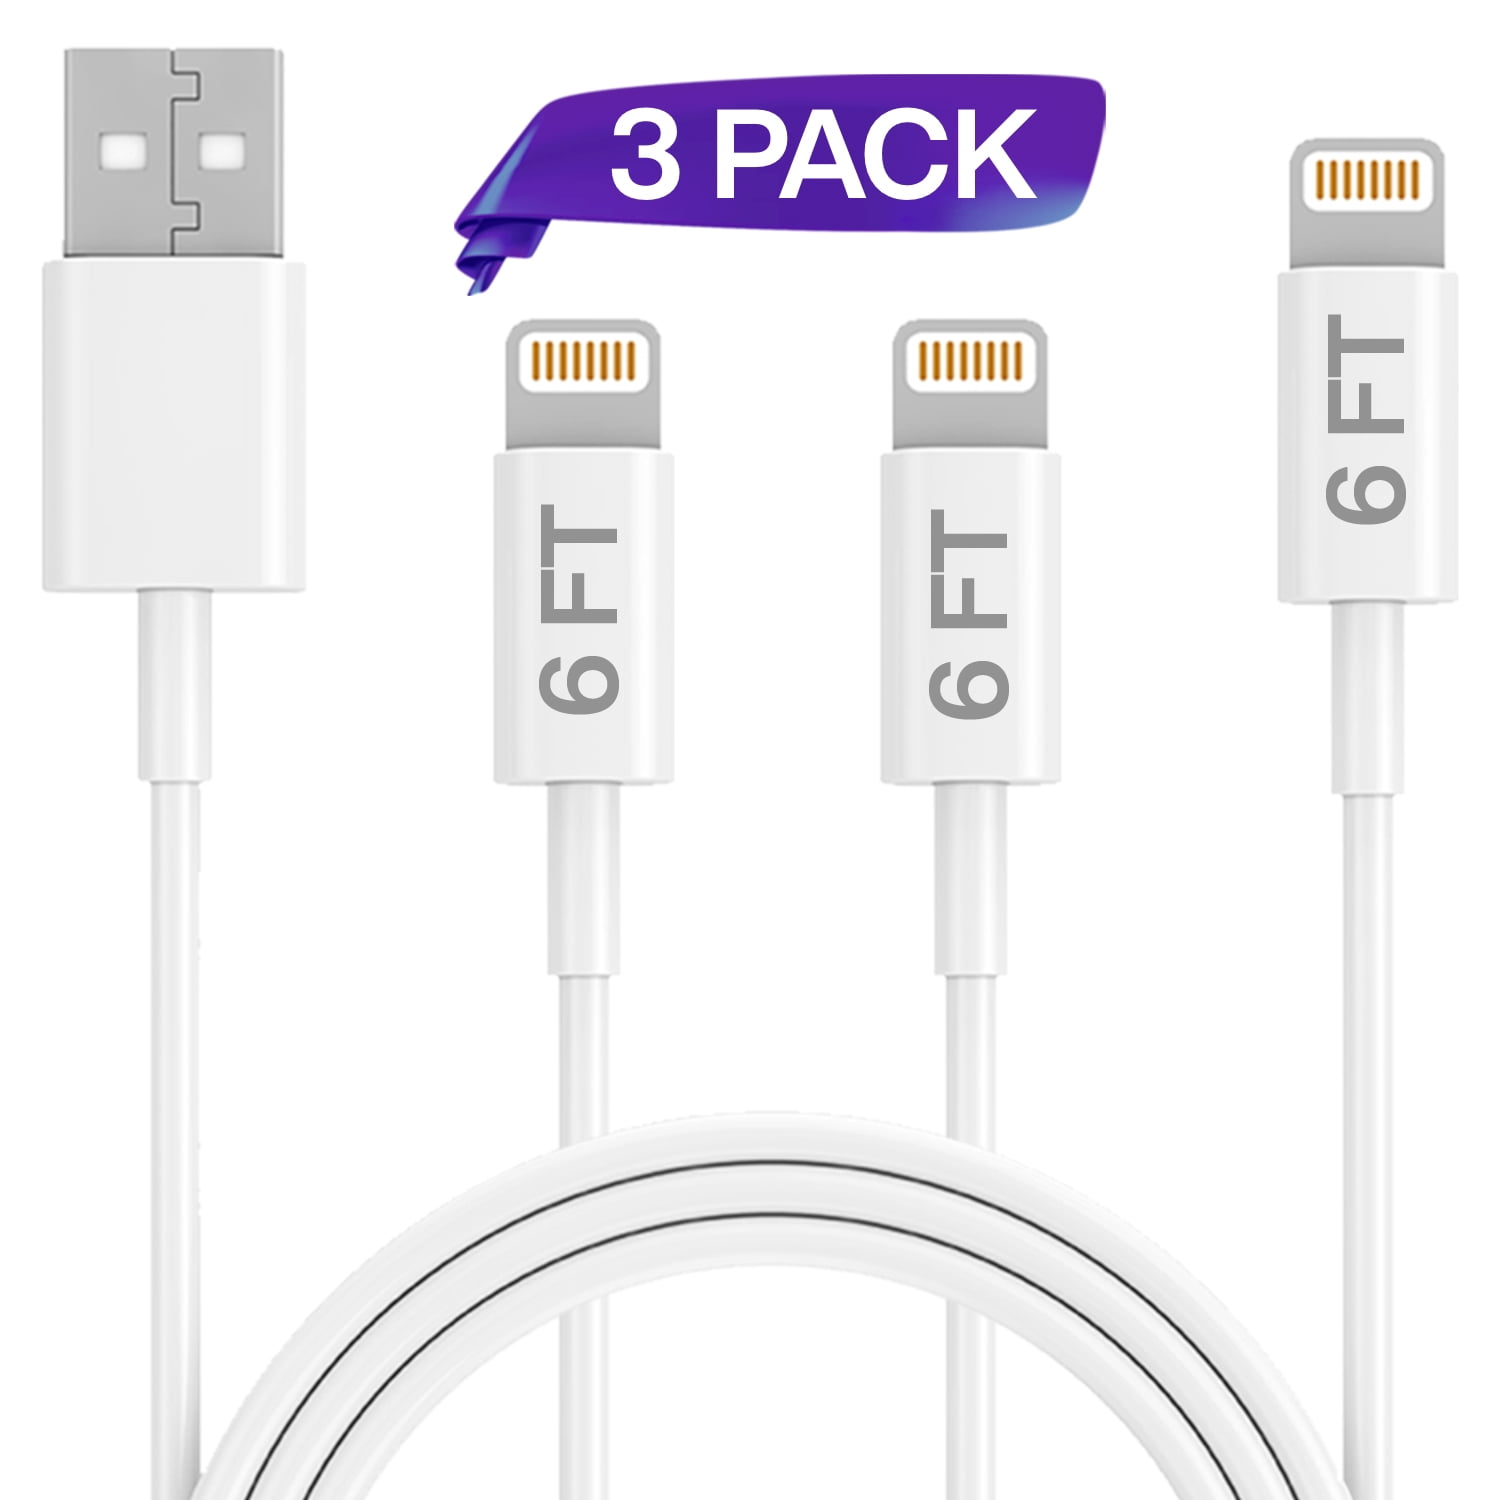 iPhone Fast Cable Charger,MFi Certified Lightning Cable 5 Pack Nylon Braided USB Charging & Syncing Cord Compatible with iPhone Xs Max/XR/XS/X/8/8Plus/7/7 Plus/6S/6S Plus/6/6Plus/iPad and More 3 FT 